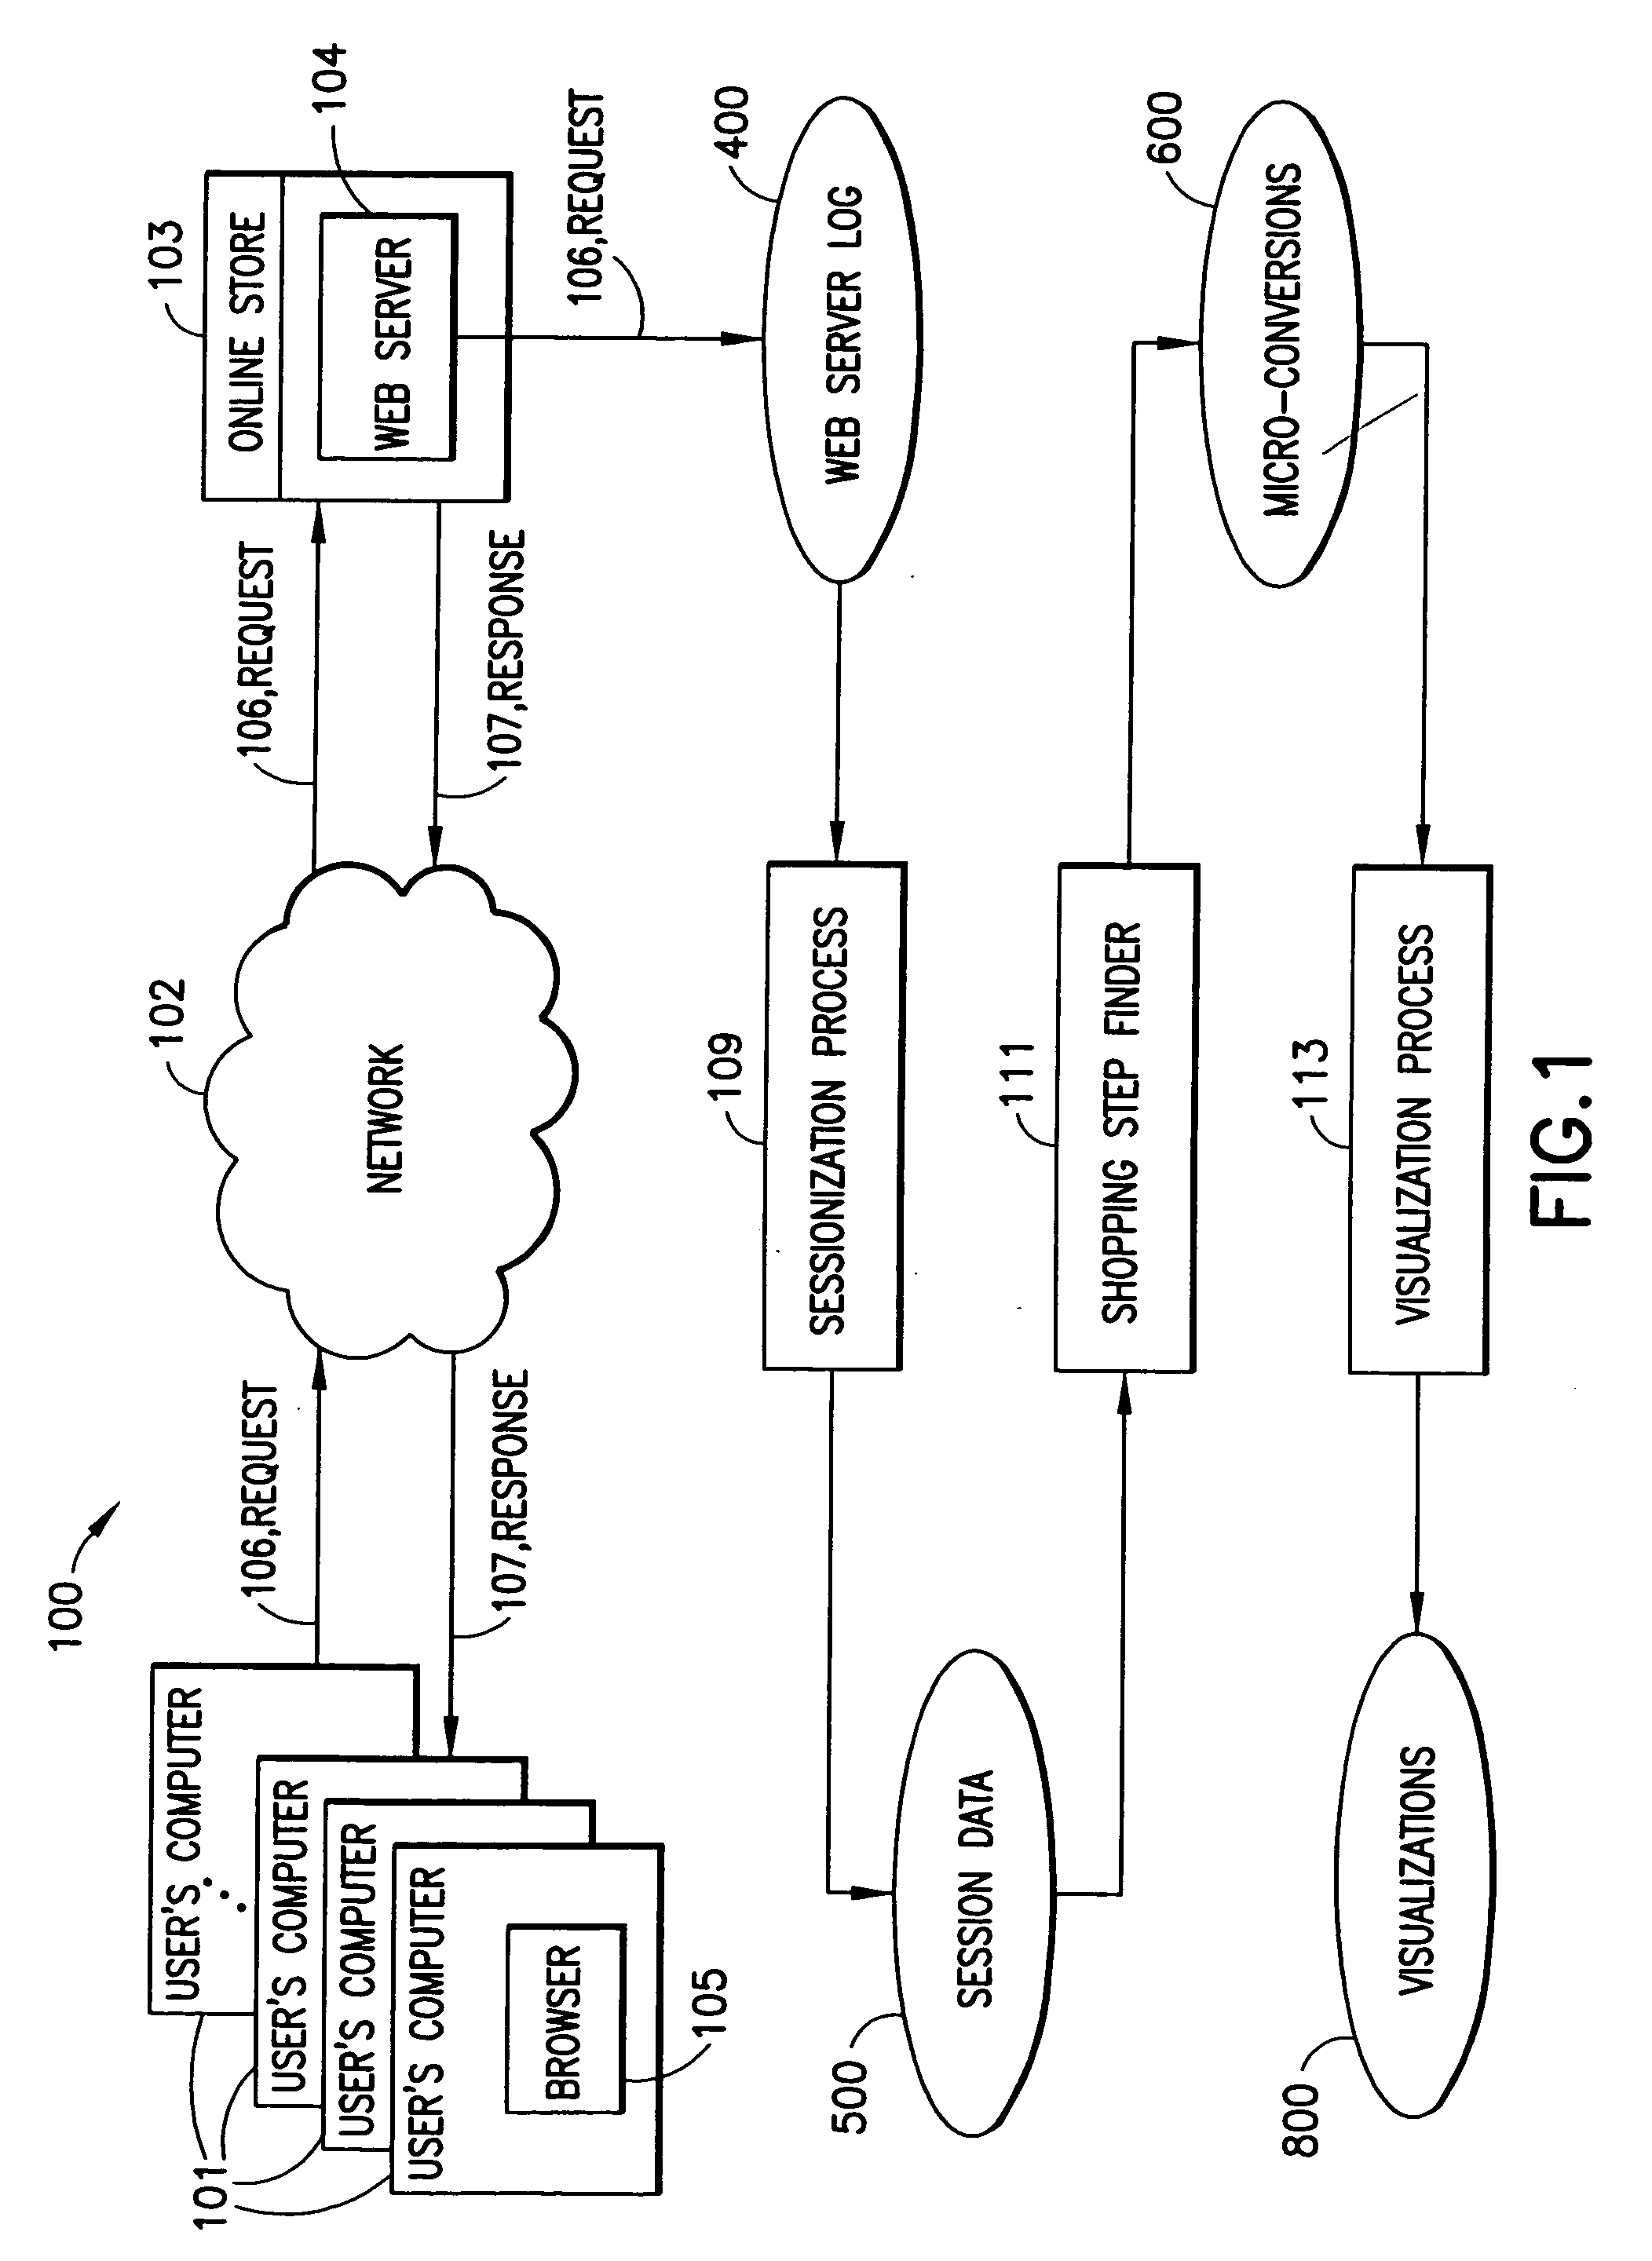 Method for graphically representing clickstream data of a shopping session on a network with a parallel coordinate system